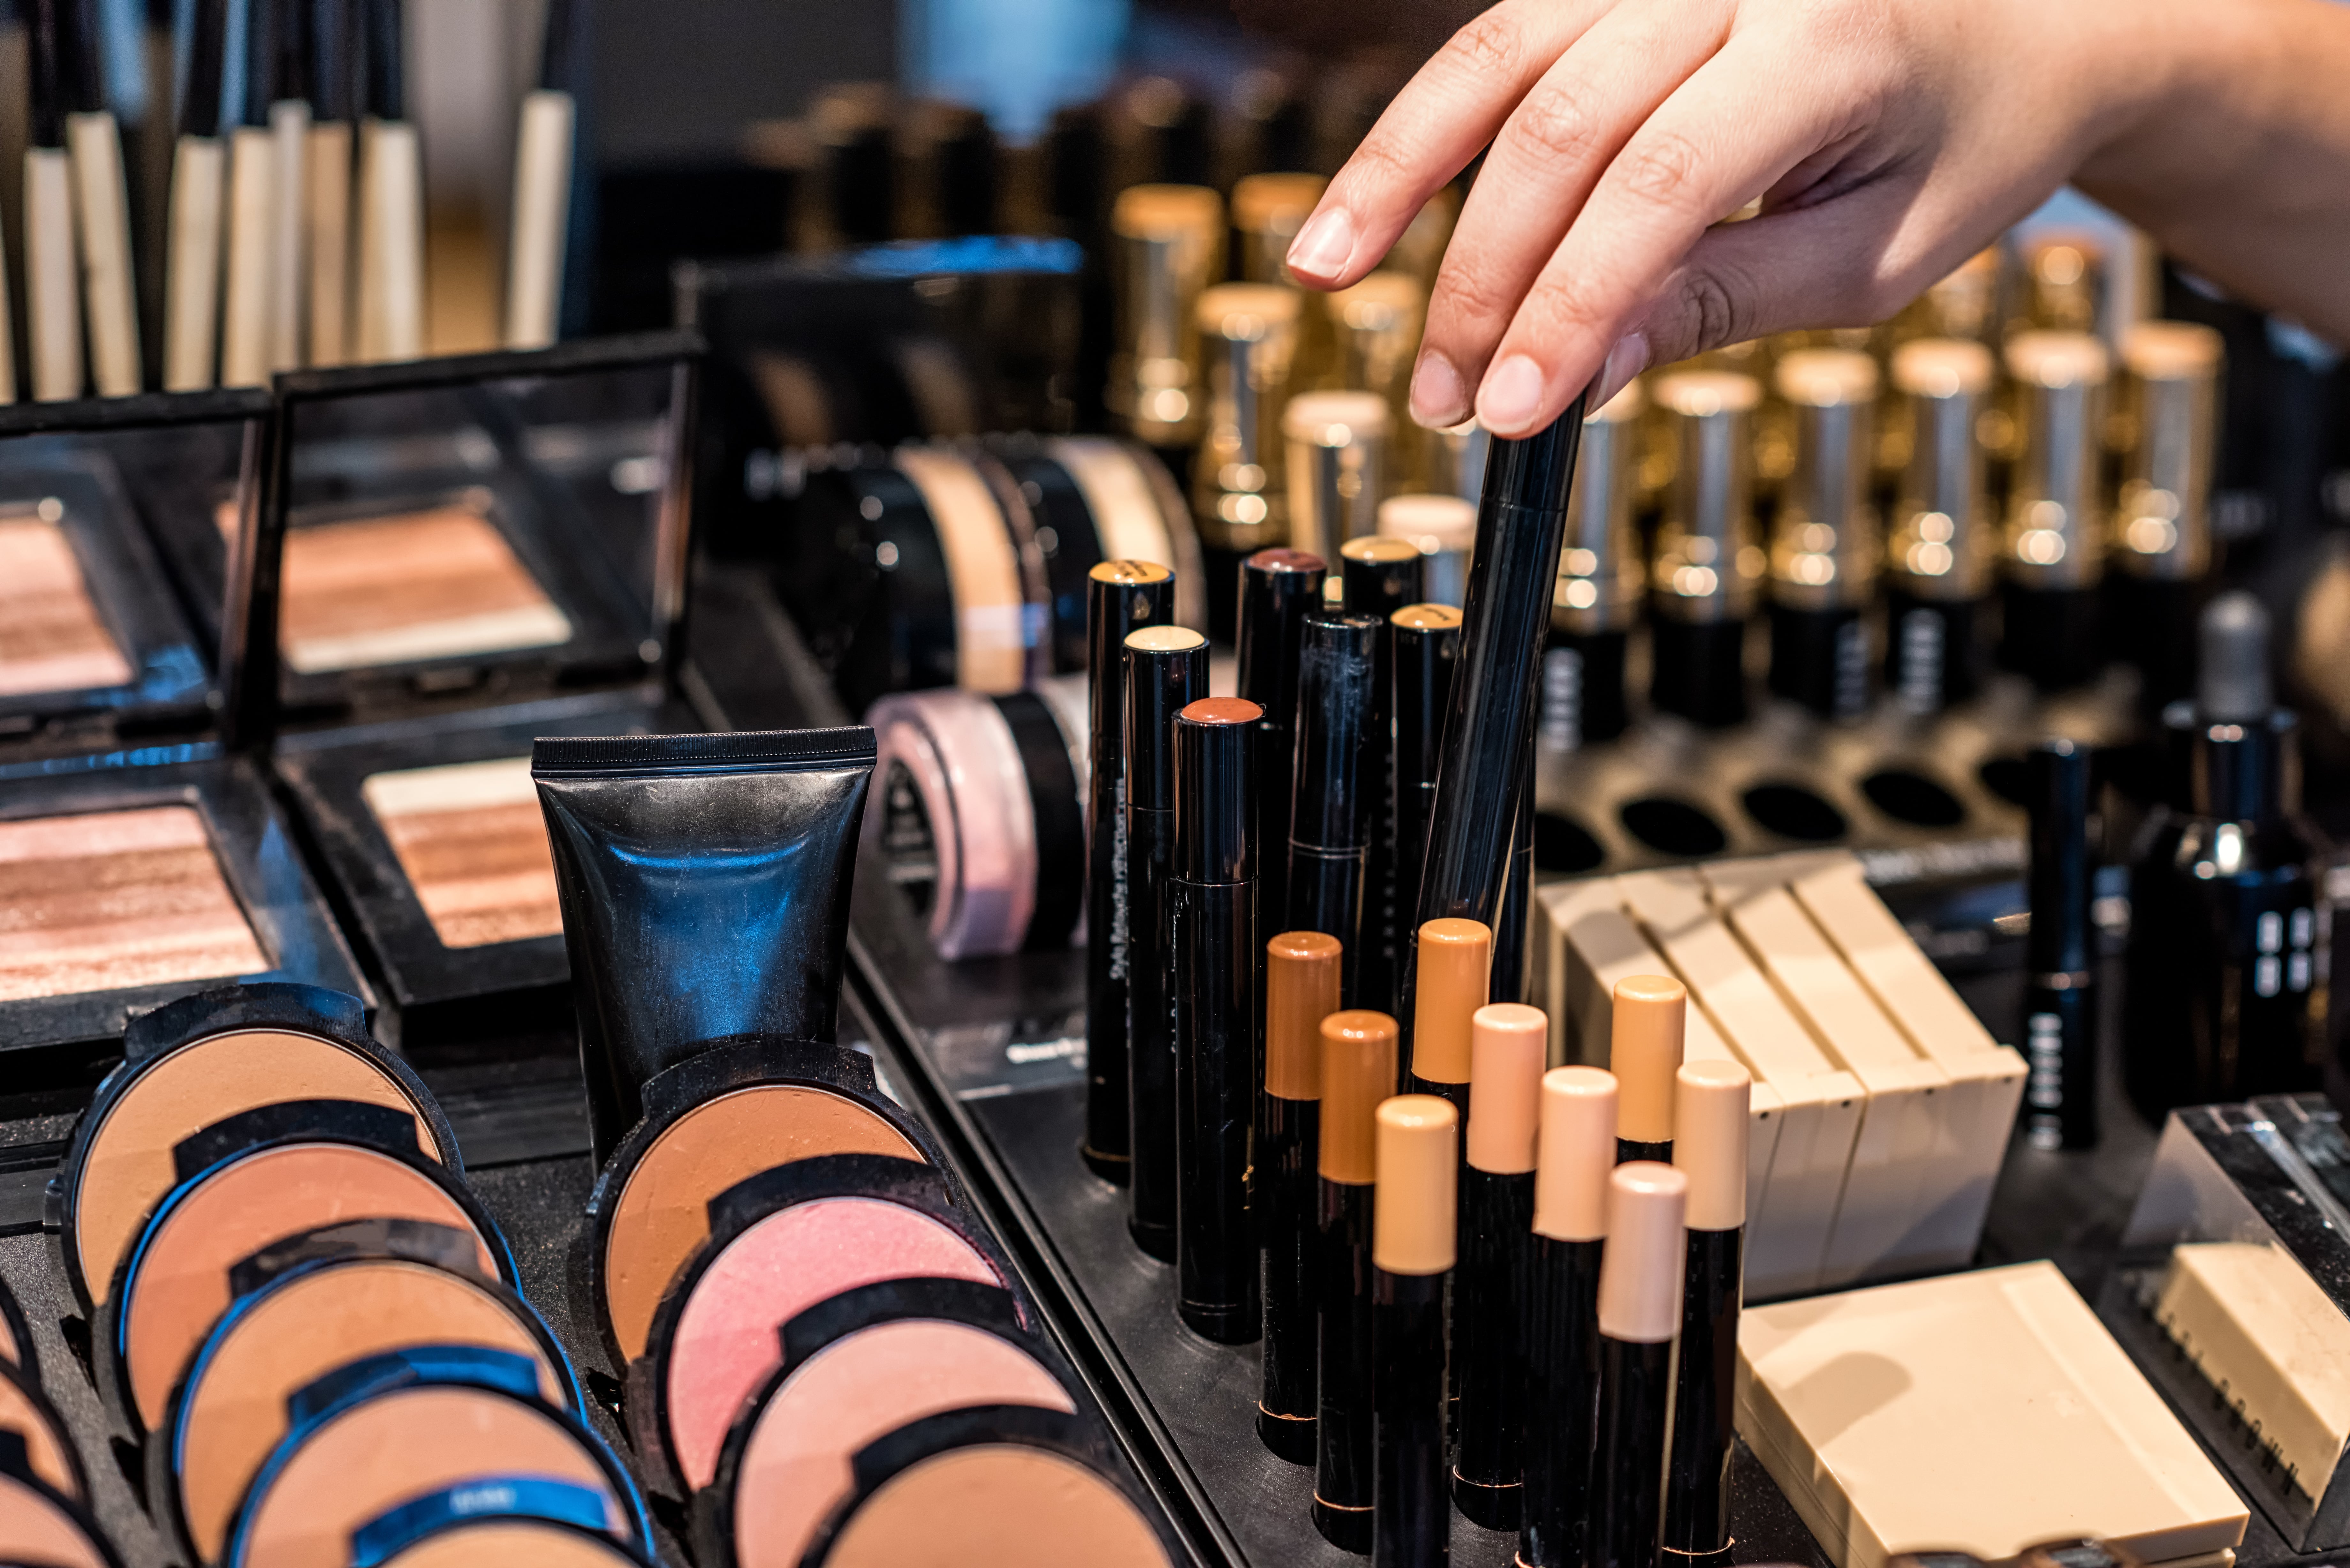 15 Best High-End Makeup Products Worth Splurging On